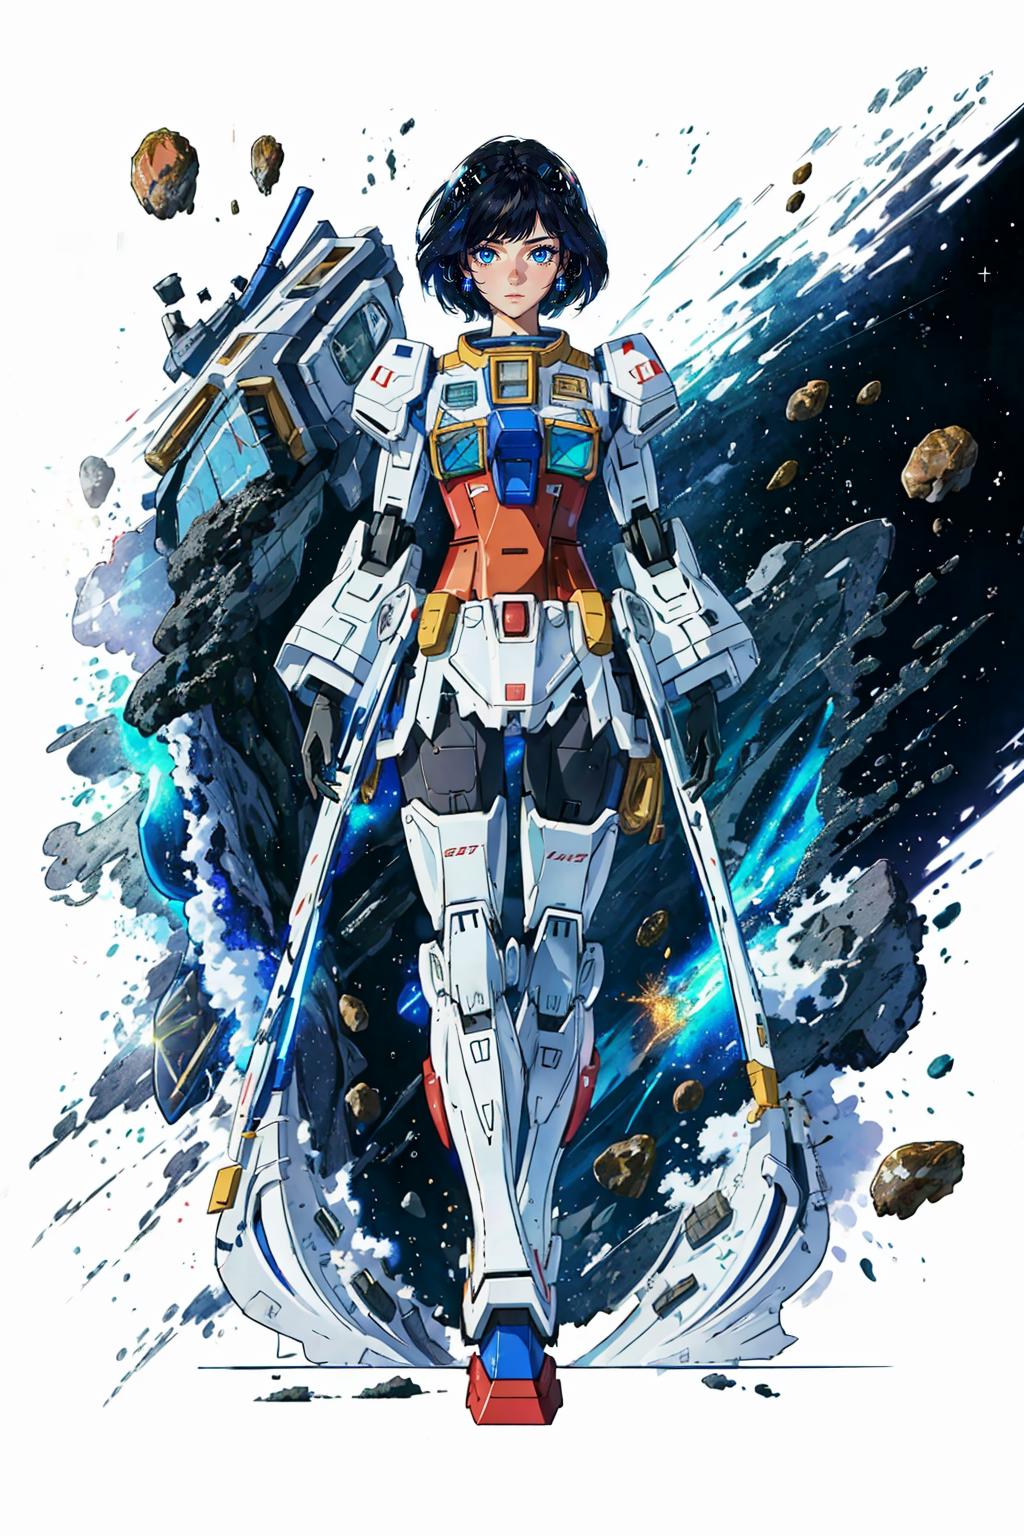 Anime Character in a Space Suit with a Blue Helmet and Red Dress.